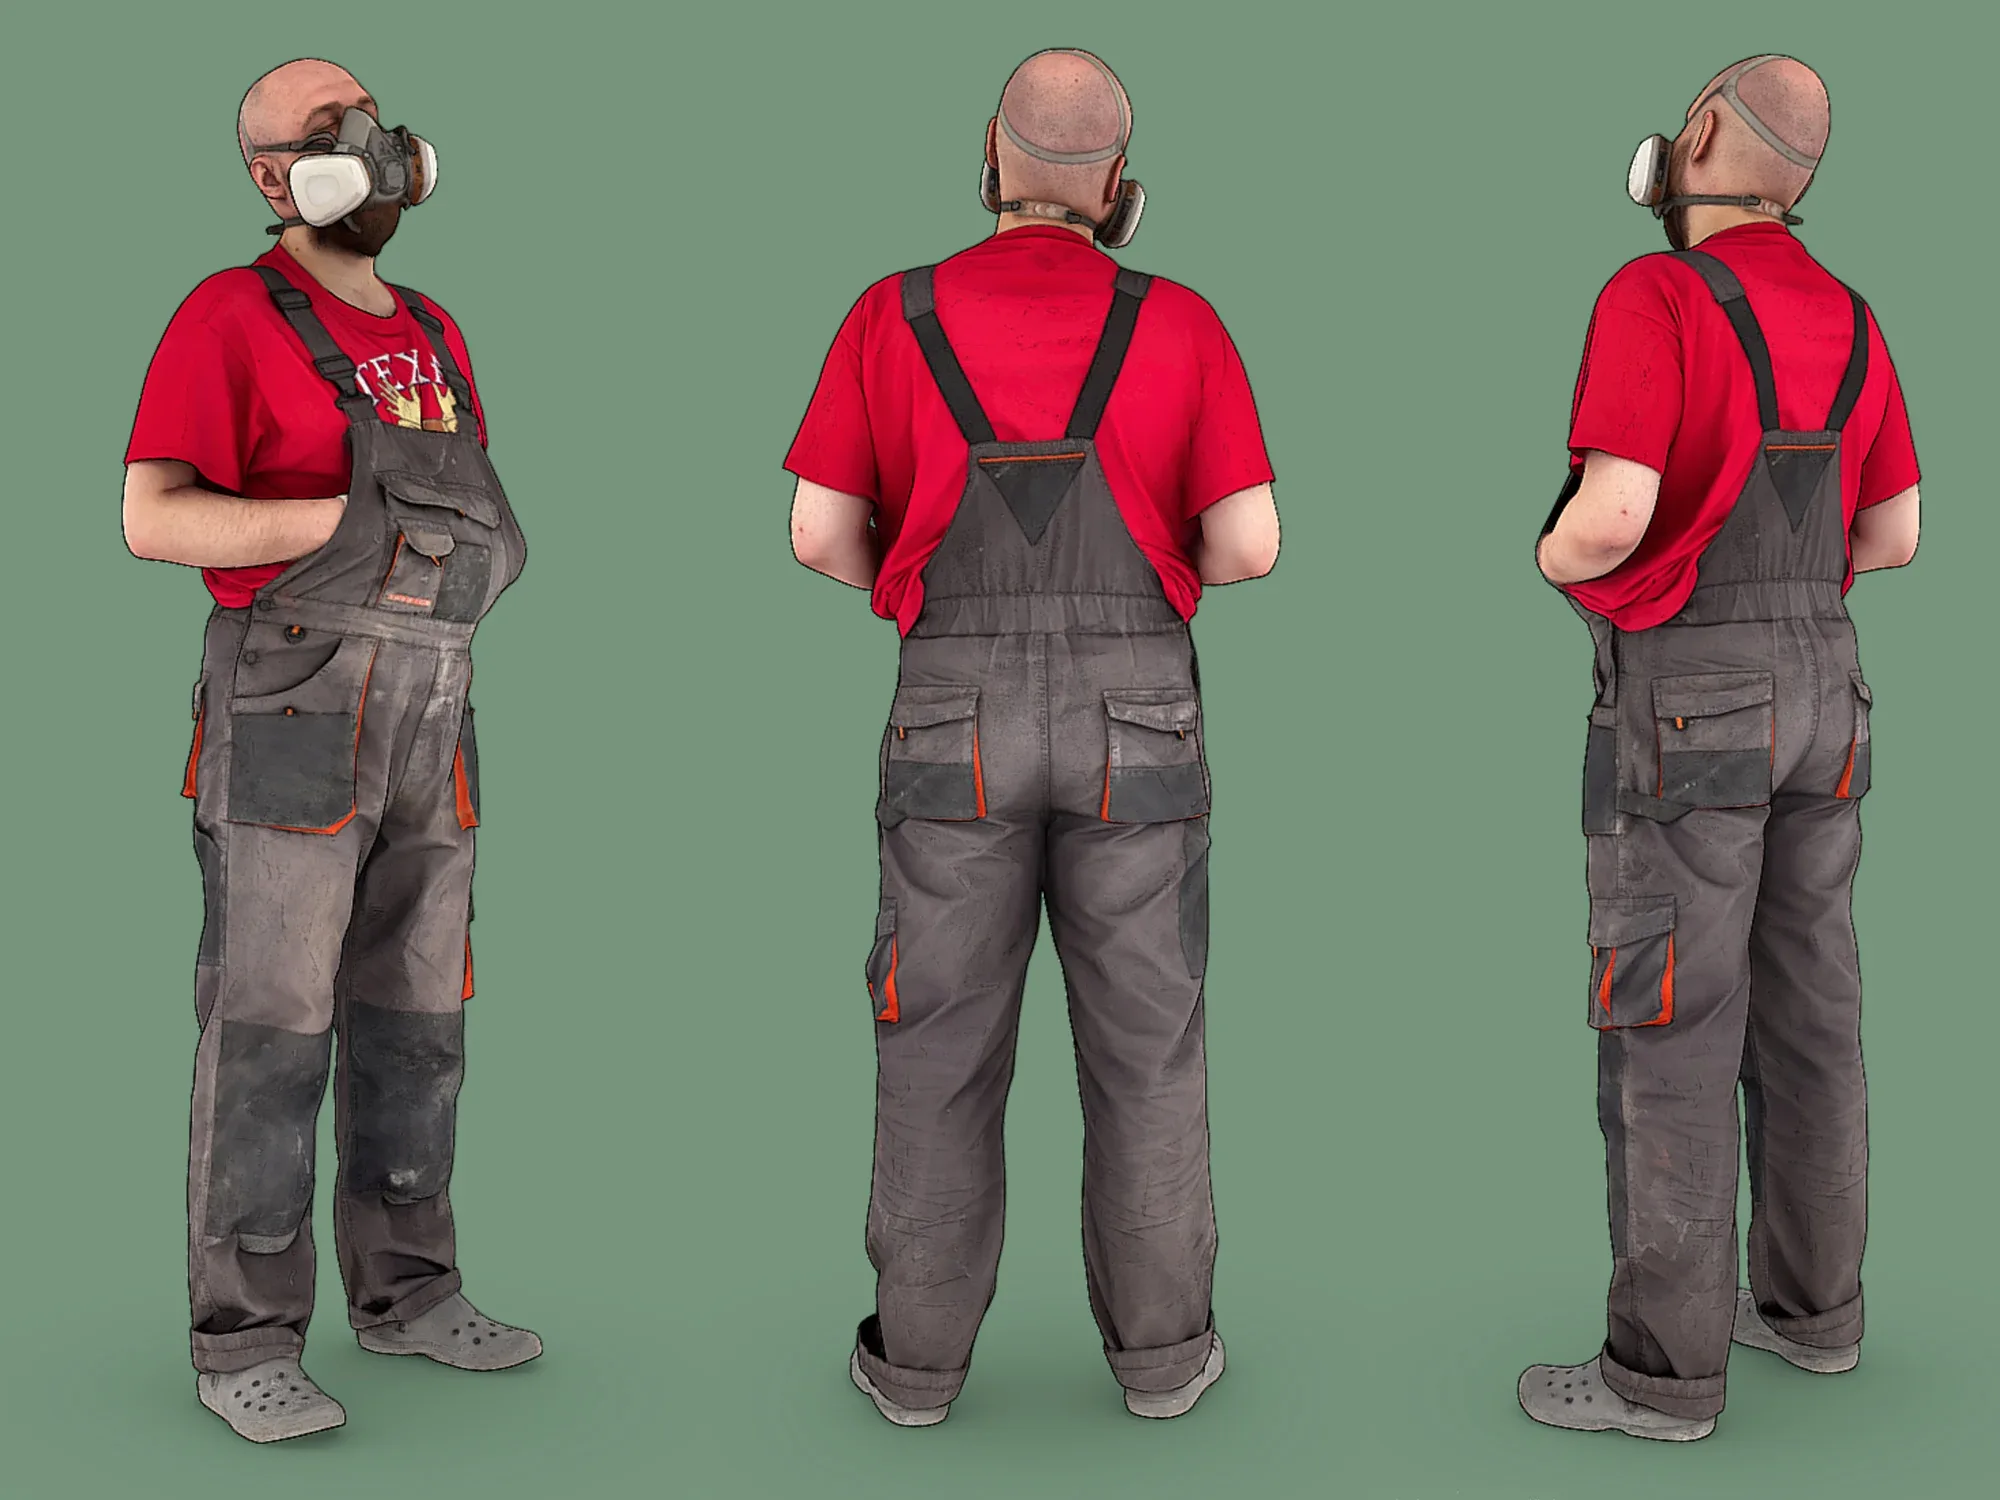 Stylized Bald Worker in a Respirator model